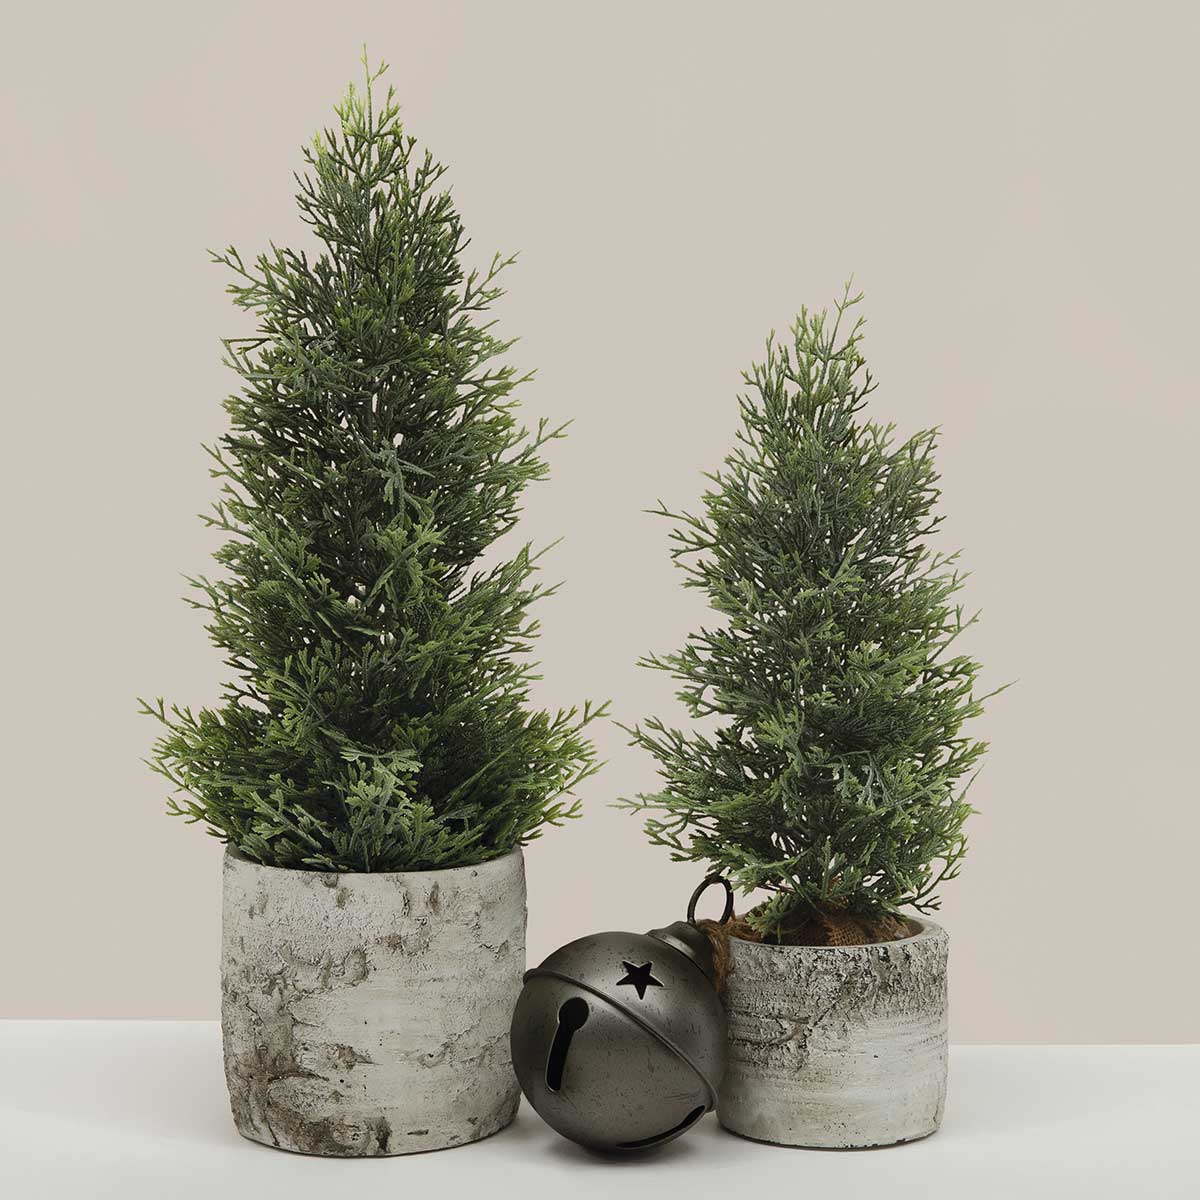 TREE FRESH CONIFER PINE SMALL 6IN X 14IN IN BURLAP BASE PLASTIC - Click Image to Close